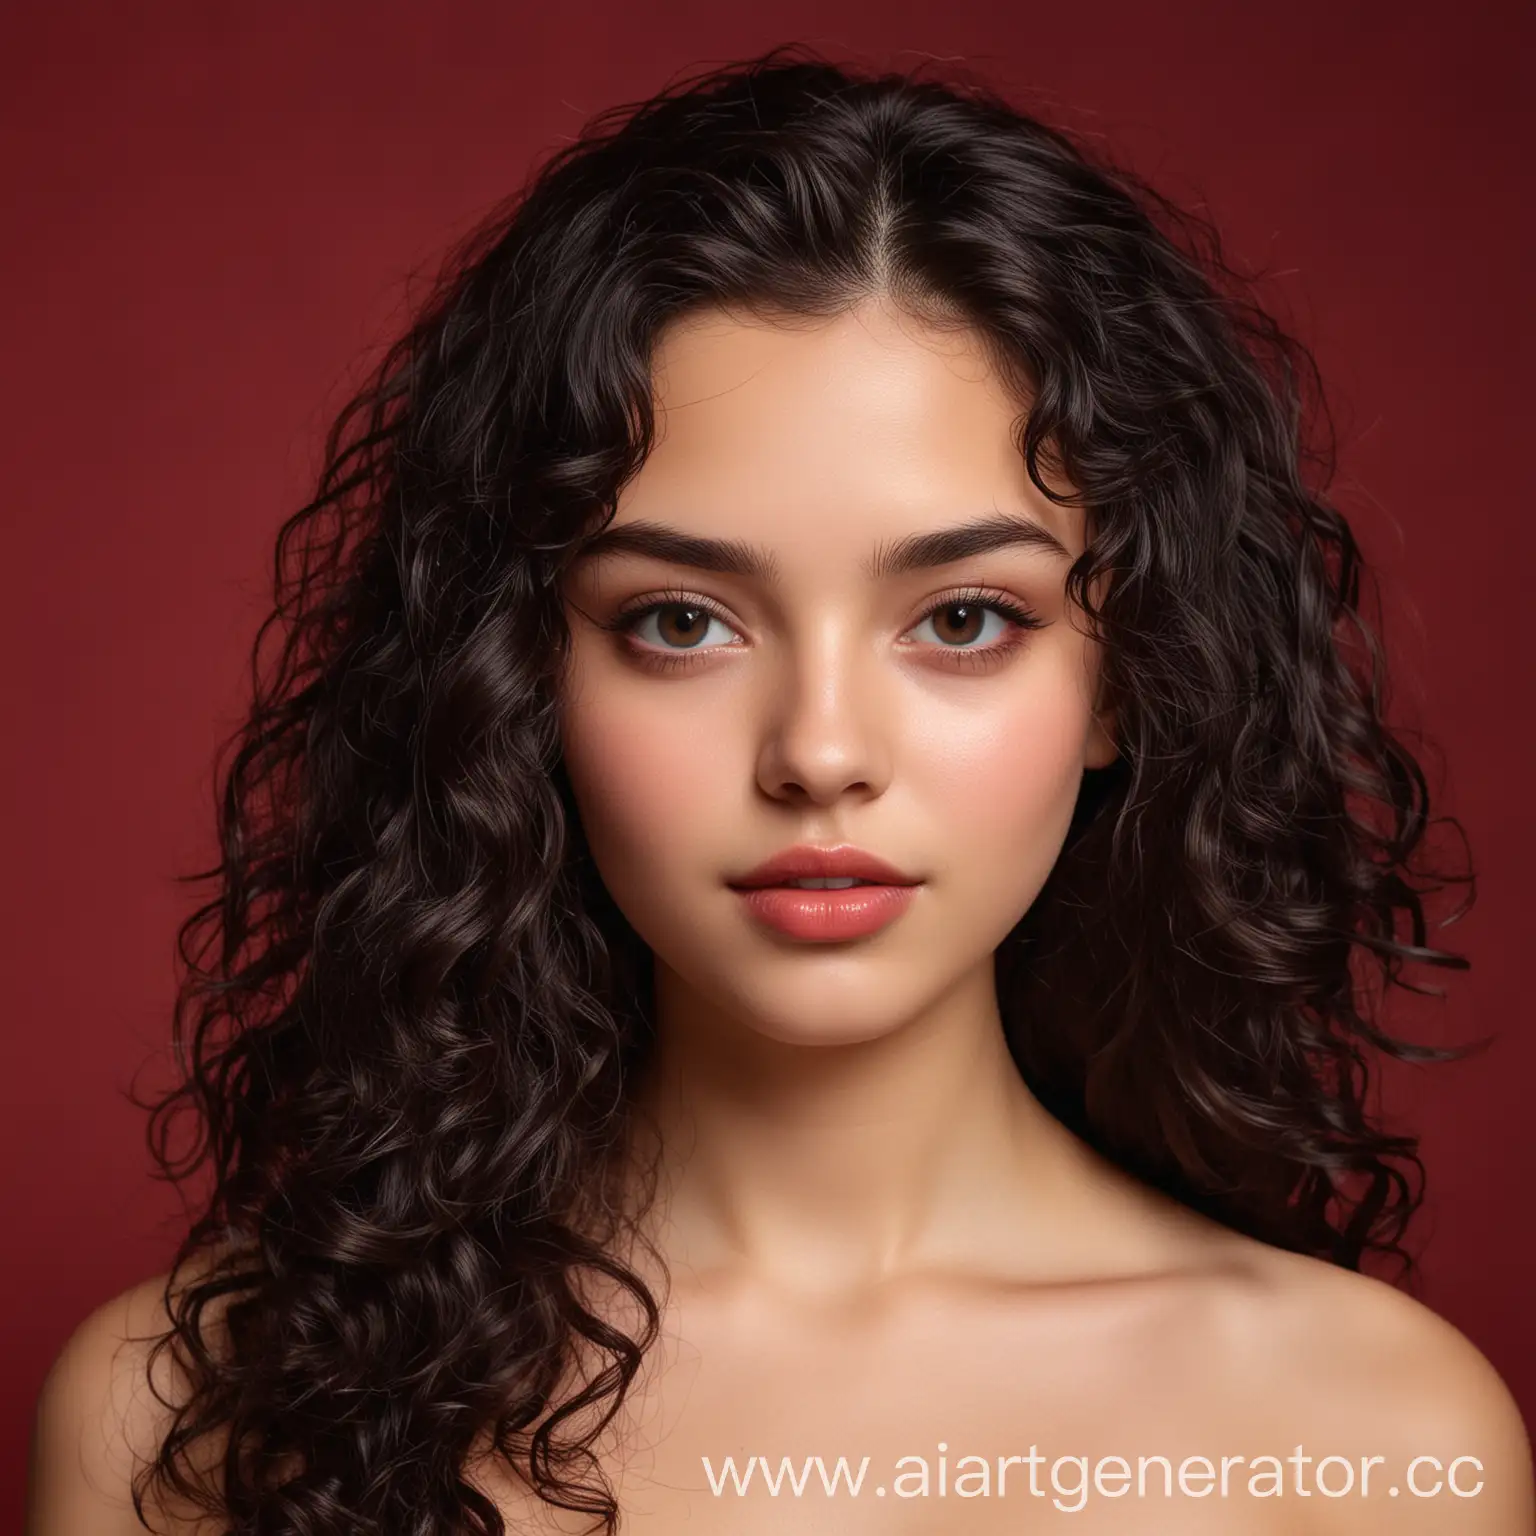 Portrait-of-a-16YearOld-Girl-with-Black-Curly-Hair-on-Dark-Red-Background